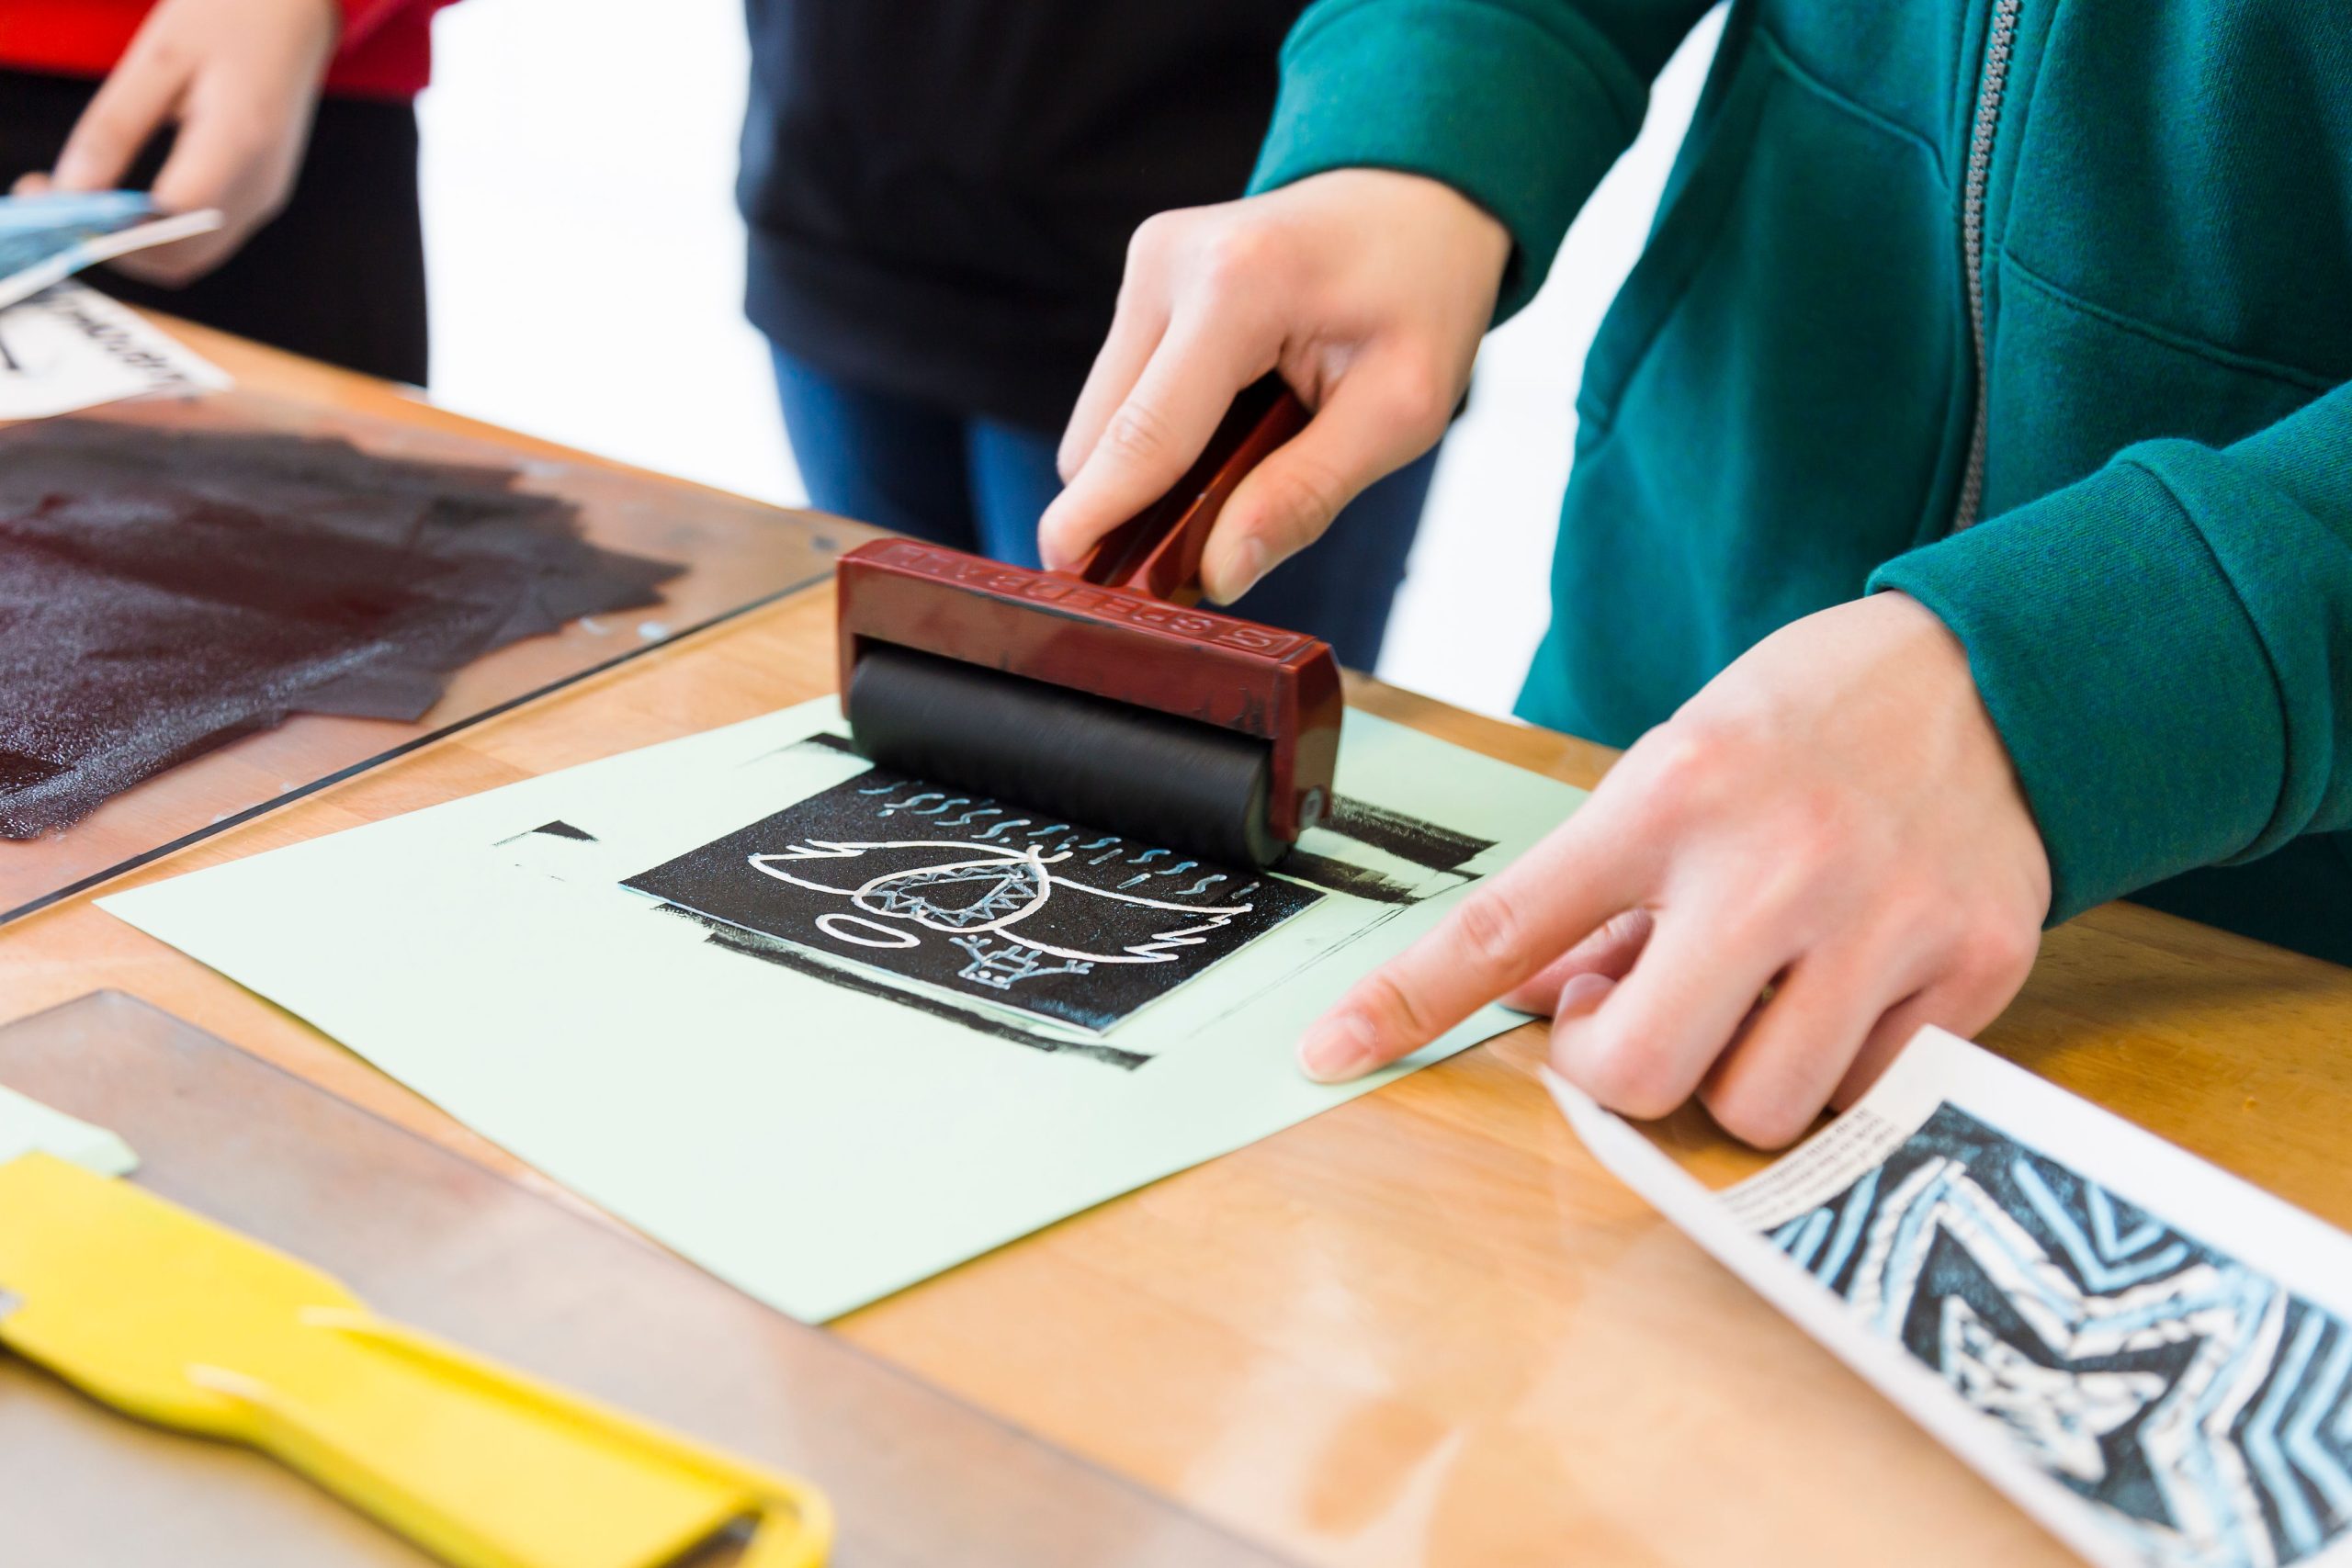 A photograph shows the hands of a person rolling ink onto a linocut print.